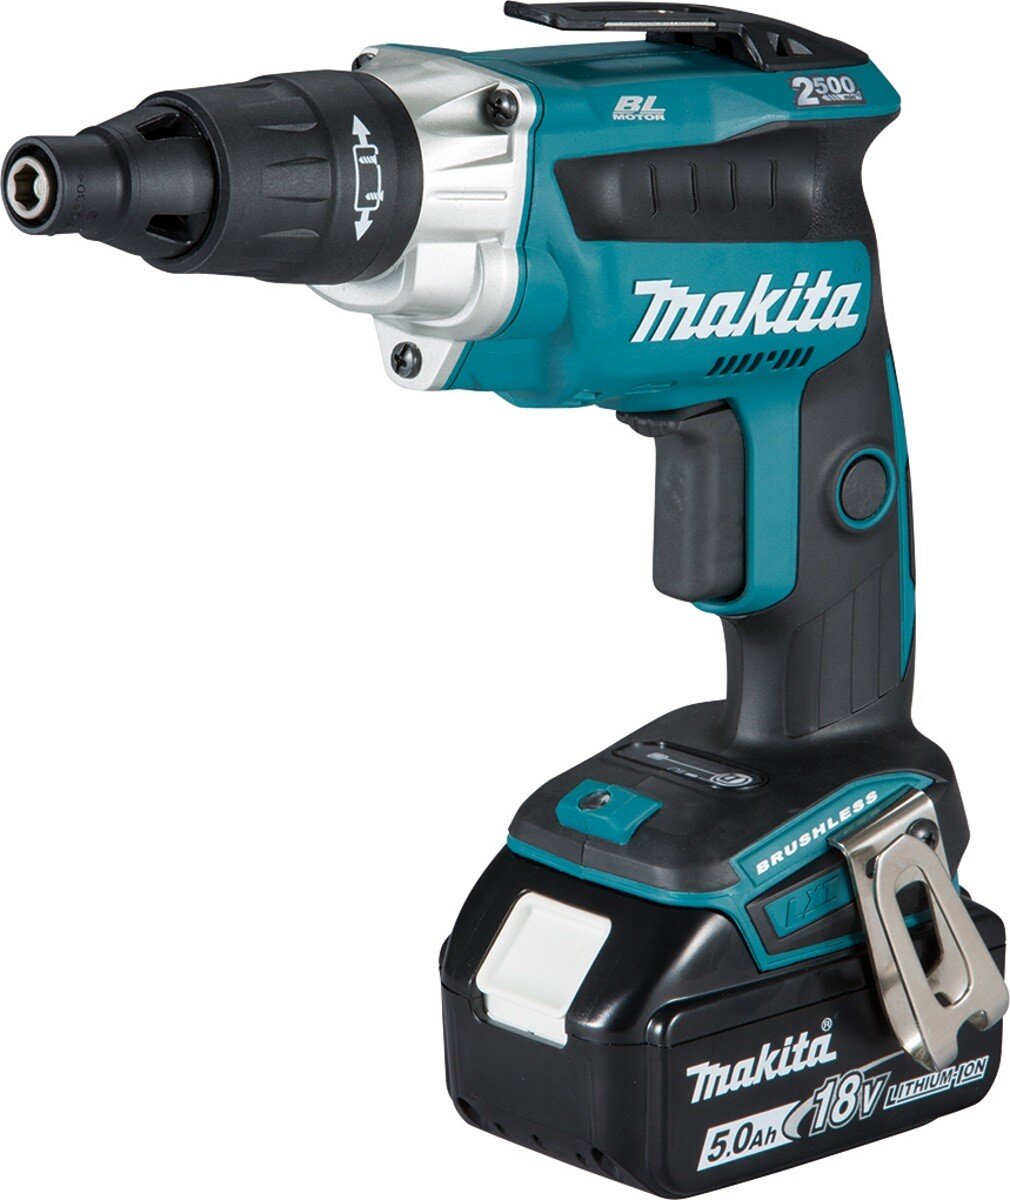 Makita DFS251RTJ 18V LXT Brushless Tek Screwdriver with 2x 5.0Ah Batteries in Makpac Case